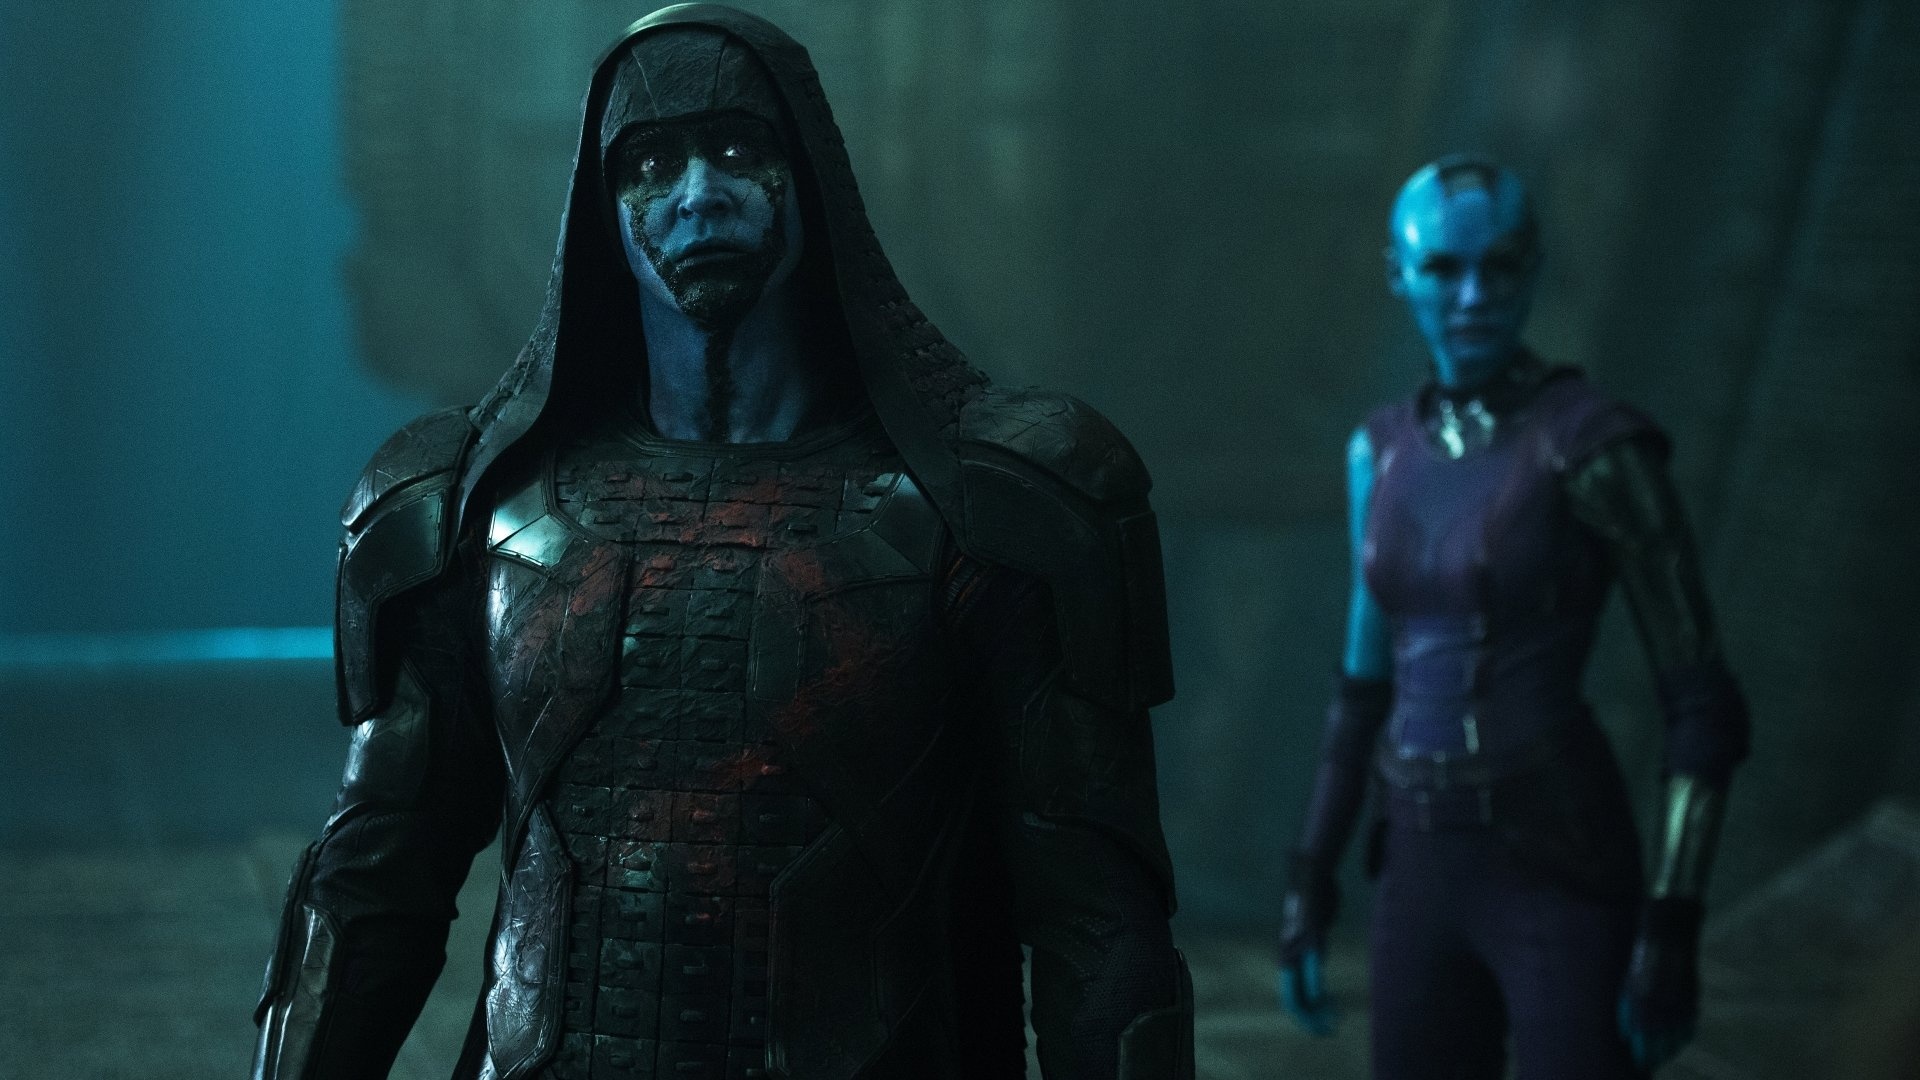 Ronan the Accuser, Ultra HD wallpapers, Background images, 1920x1080 Full HD Desktop